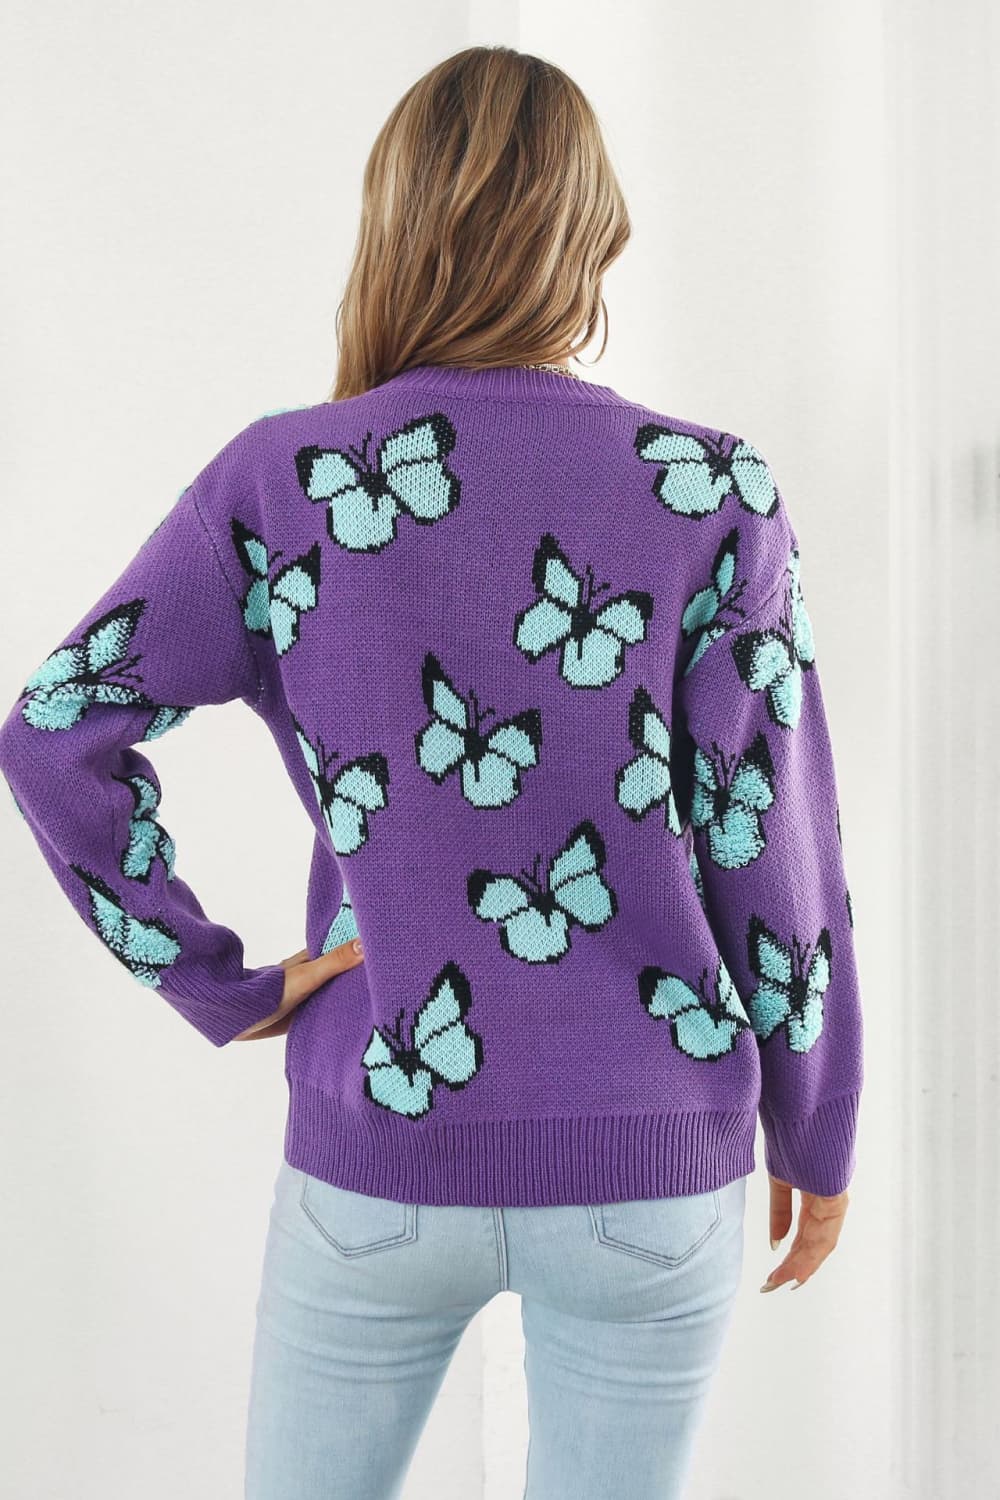 Fuzzy Monarch Butterfly Raised Shag Bold Colors Knit Pullover Sweater Shirt